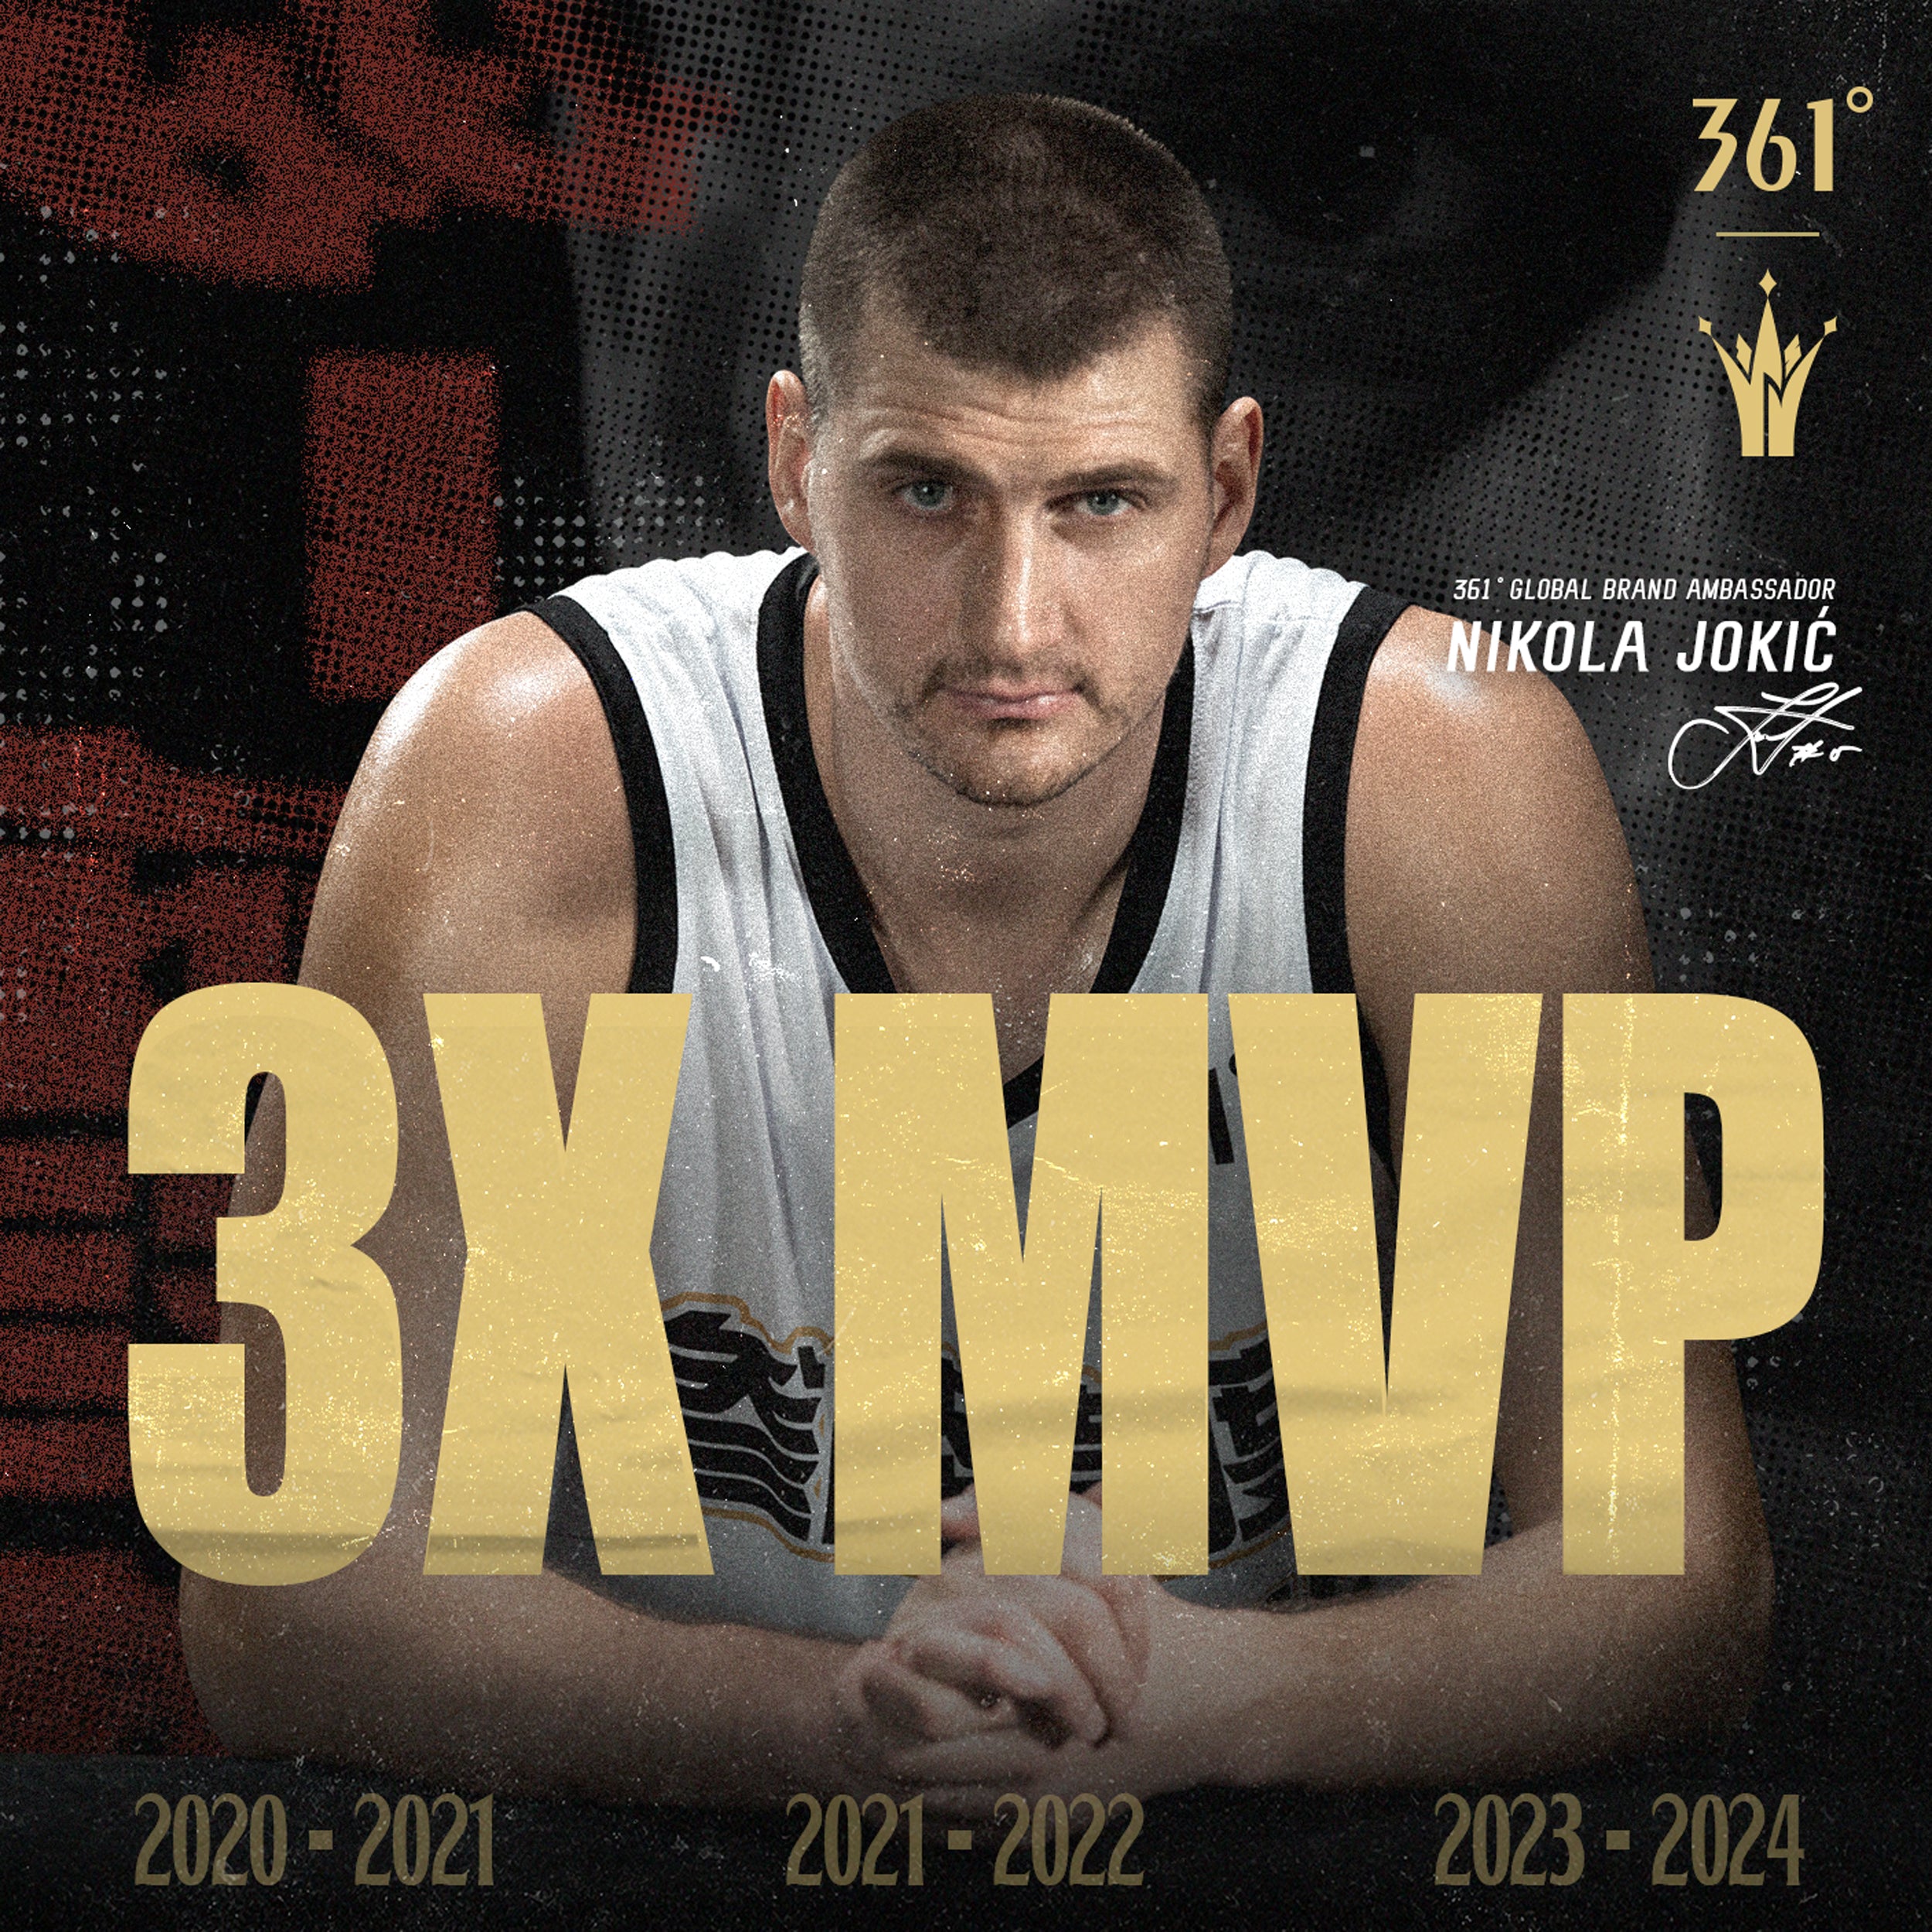 For the 3rd time in the past 4 seasons, Nicola Jokic is the 2023-24 NBA's Most Valuable Player